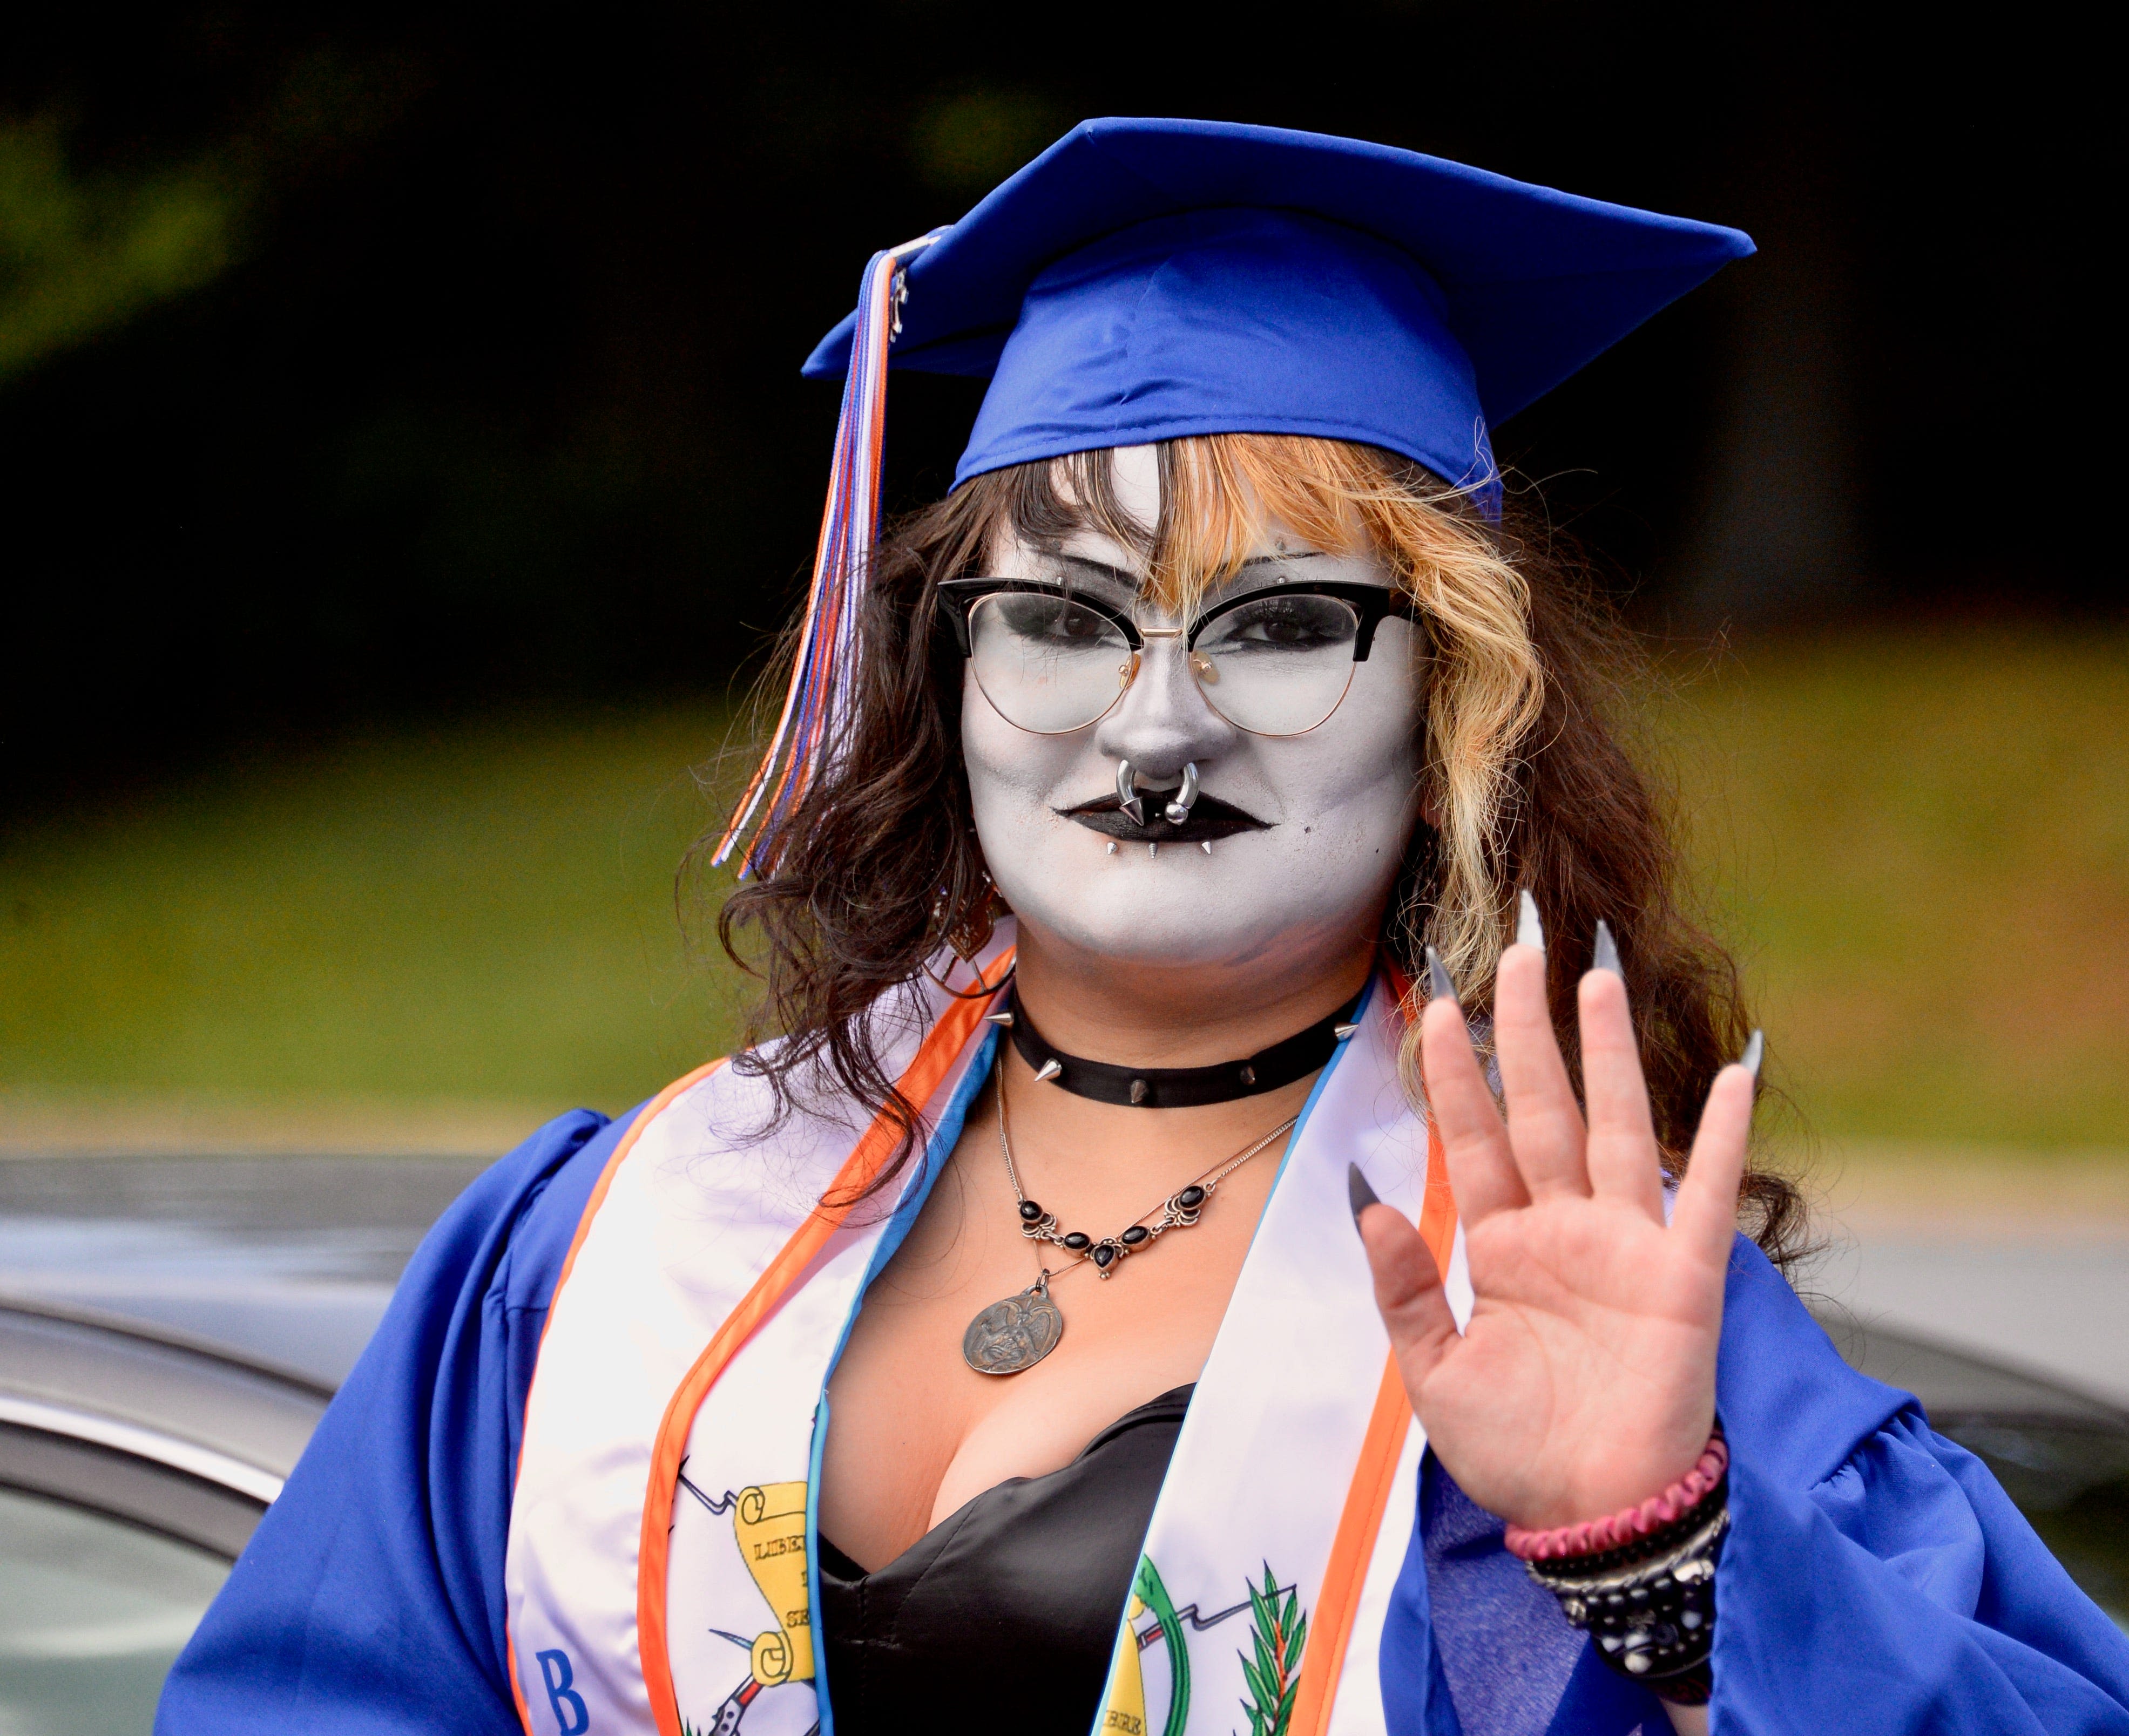 Boonsboro High senior denied chance to walk on graduation stage due to makeup 'concerns'